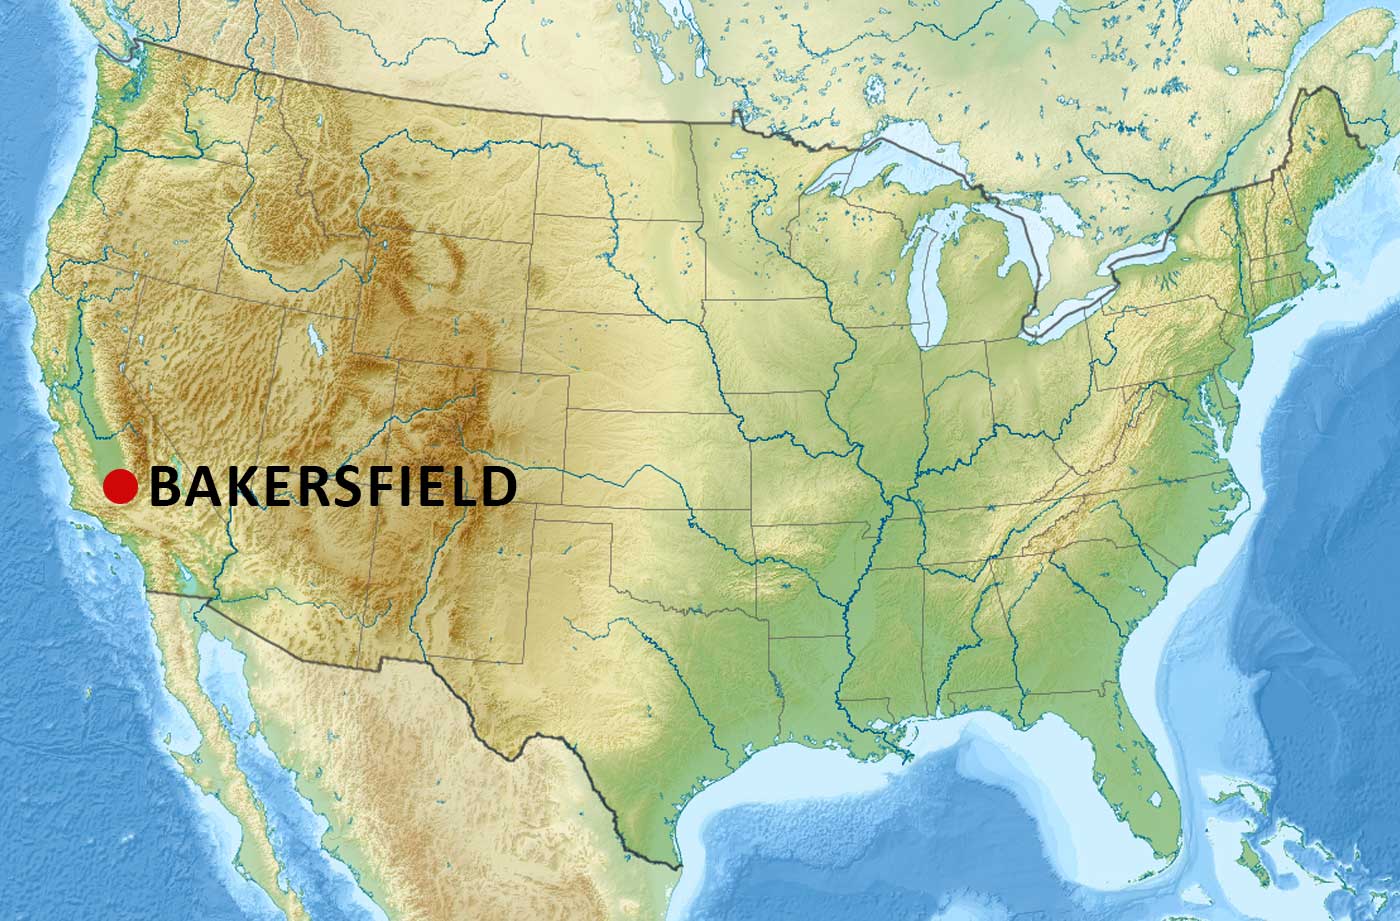 Location of Bakersfield on California US Map